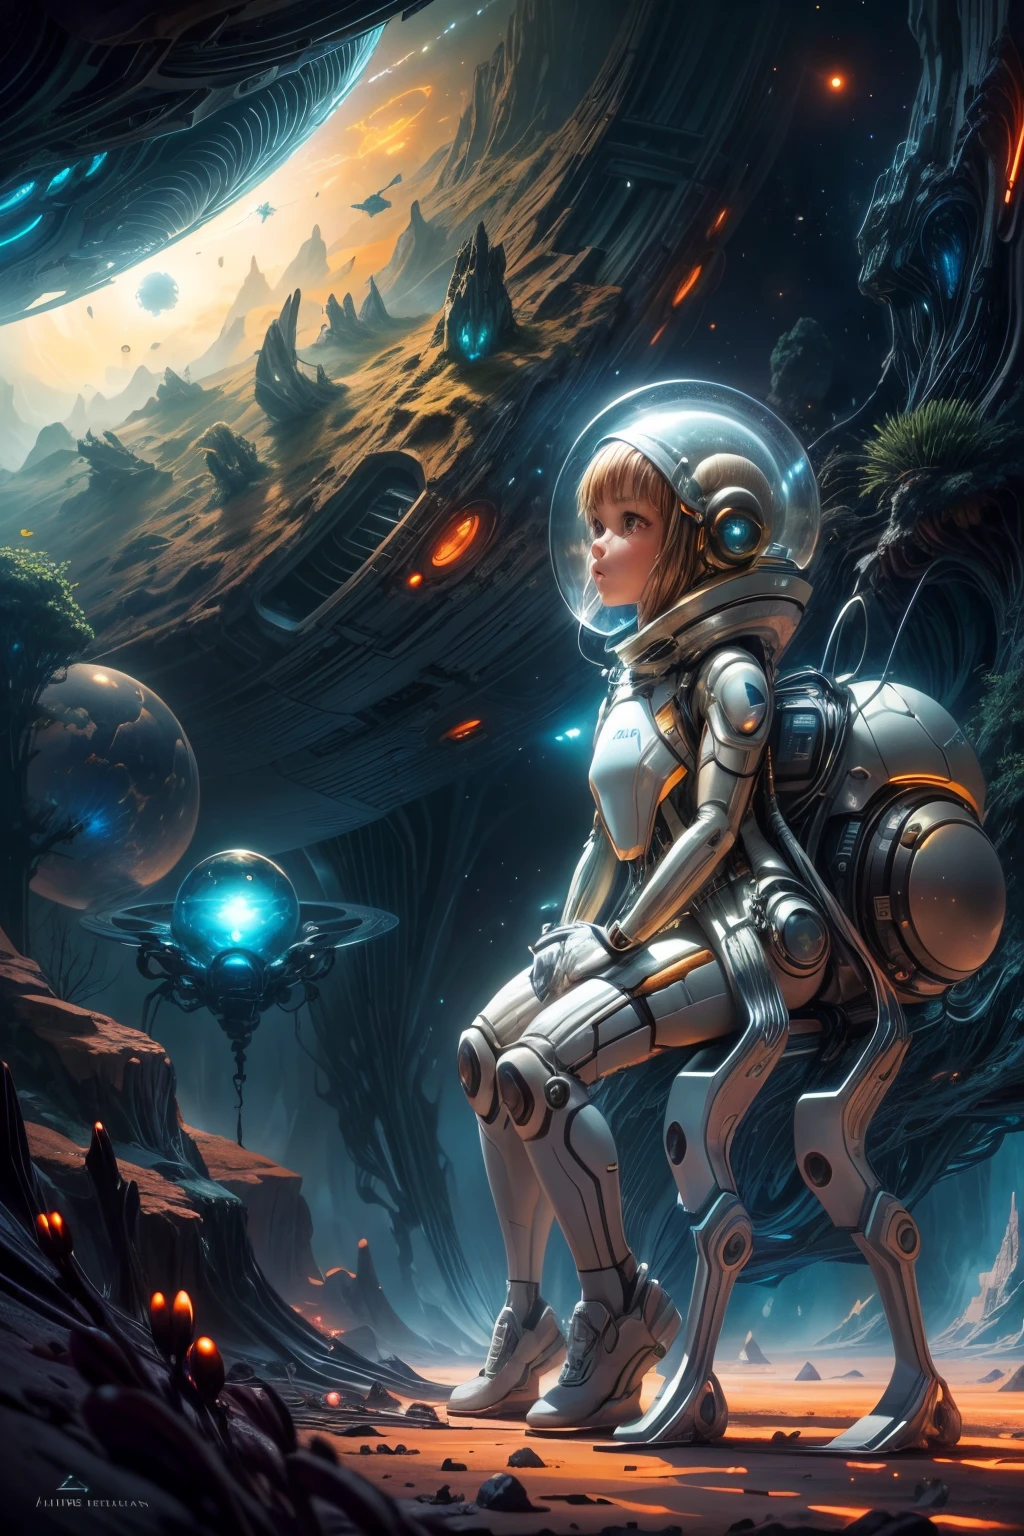 Intriguing encounter: ((Ant and Girl)) in science fiction tandem, under the otherworldly glow of a binary star system, ((futuristic space suits)), surreal surroundings, captivating atmosphere, detailed character expressions, ((alien landscape)).